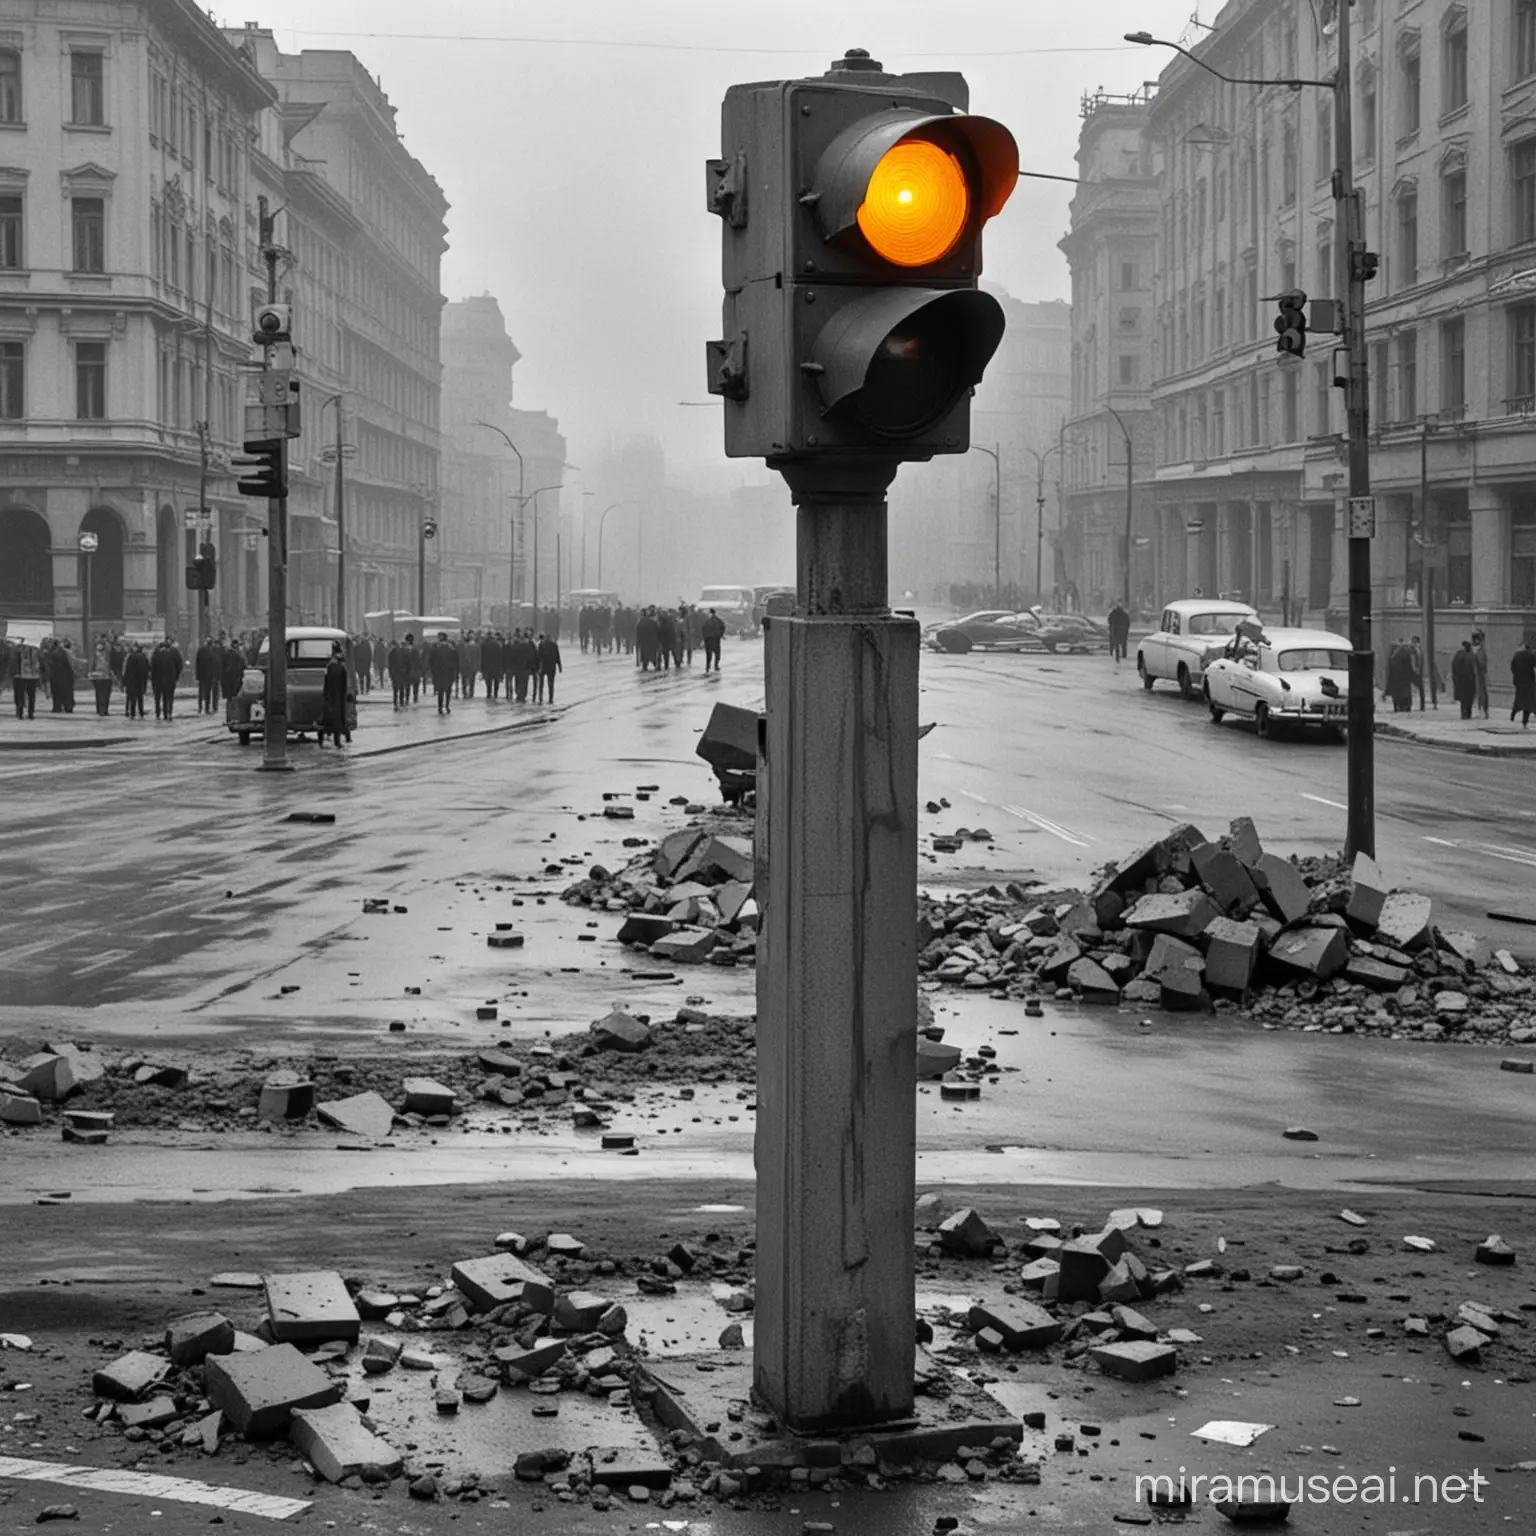 Josef Stalins Private Traffic Light Crushed by Falling Concrete Block